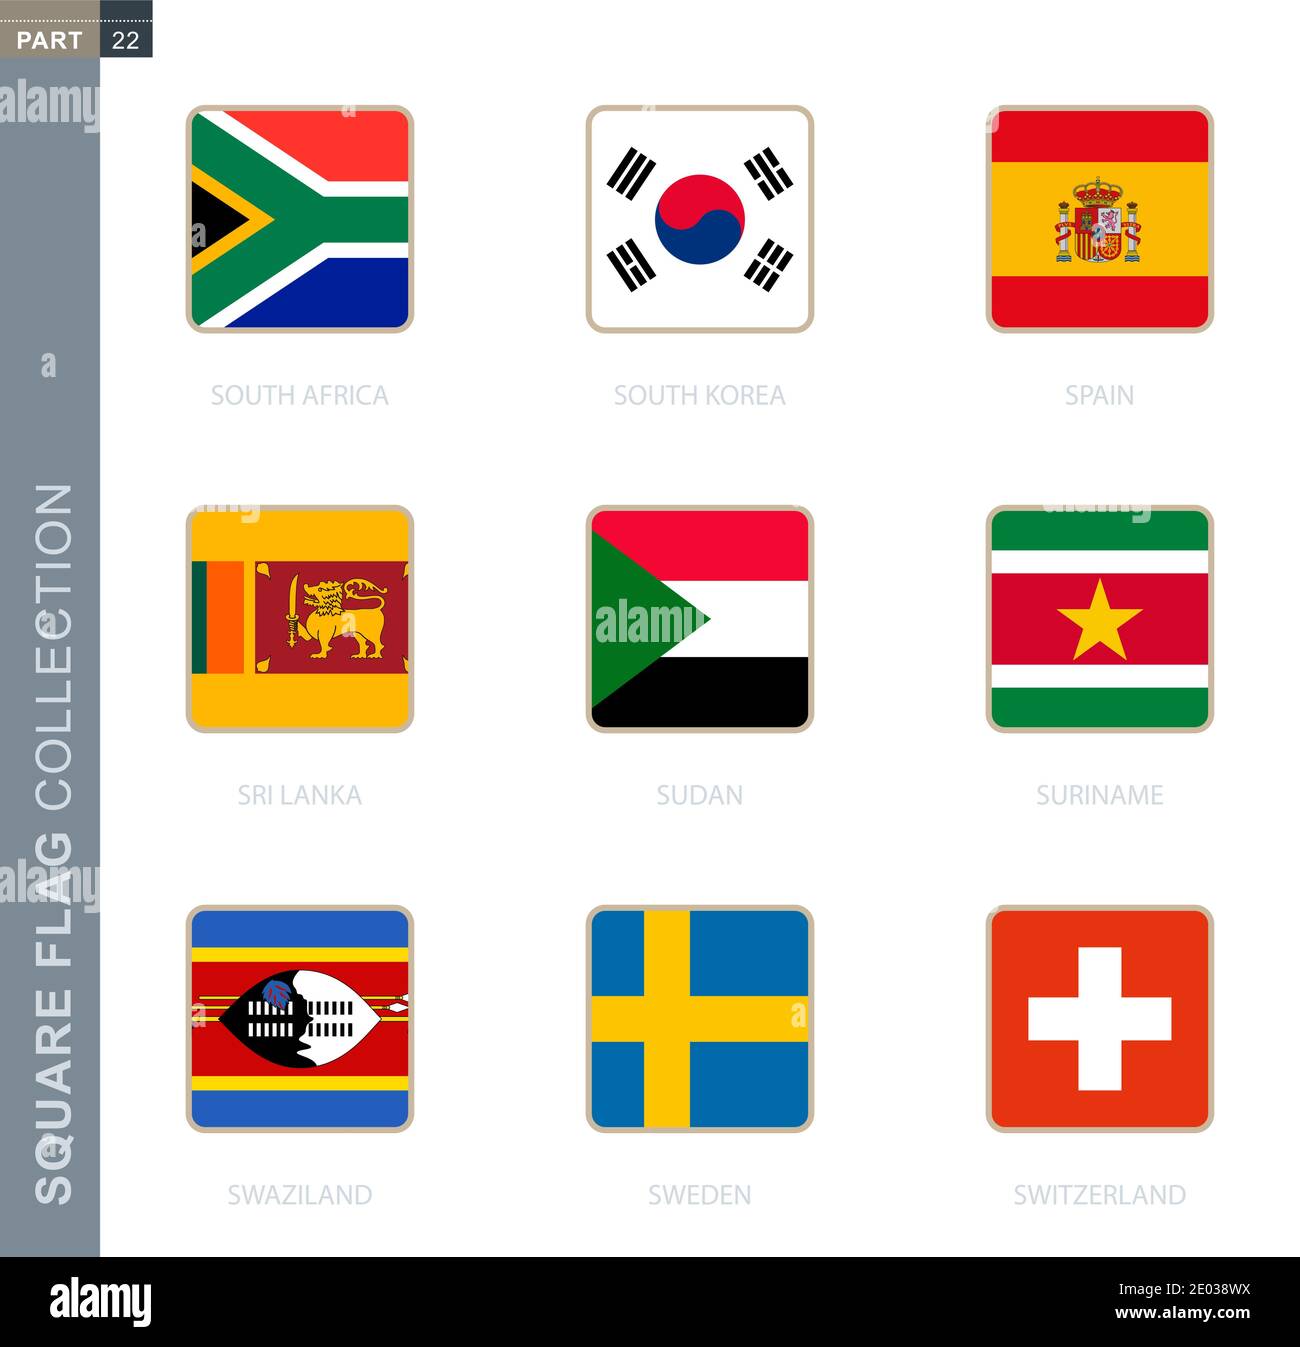 Square flags collection of the world. Square flags of South Africa, South Korea, Spain, Sri Lanka, Sudan, Suriname, Swaziland, Sweden, Switzerland Stock Vector